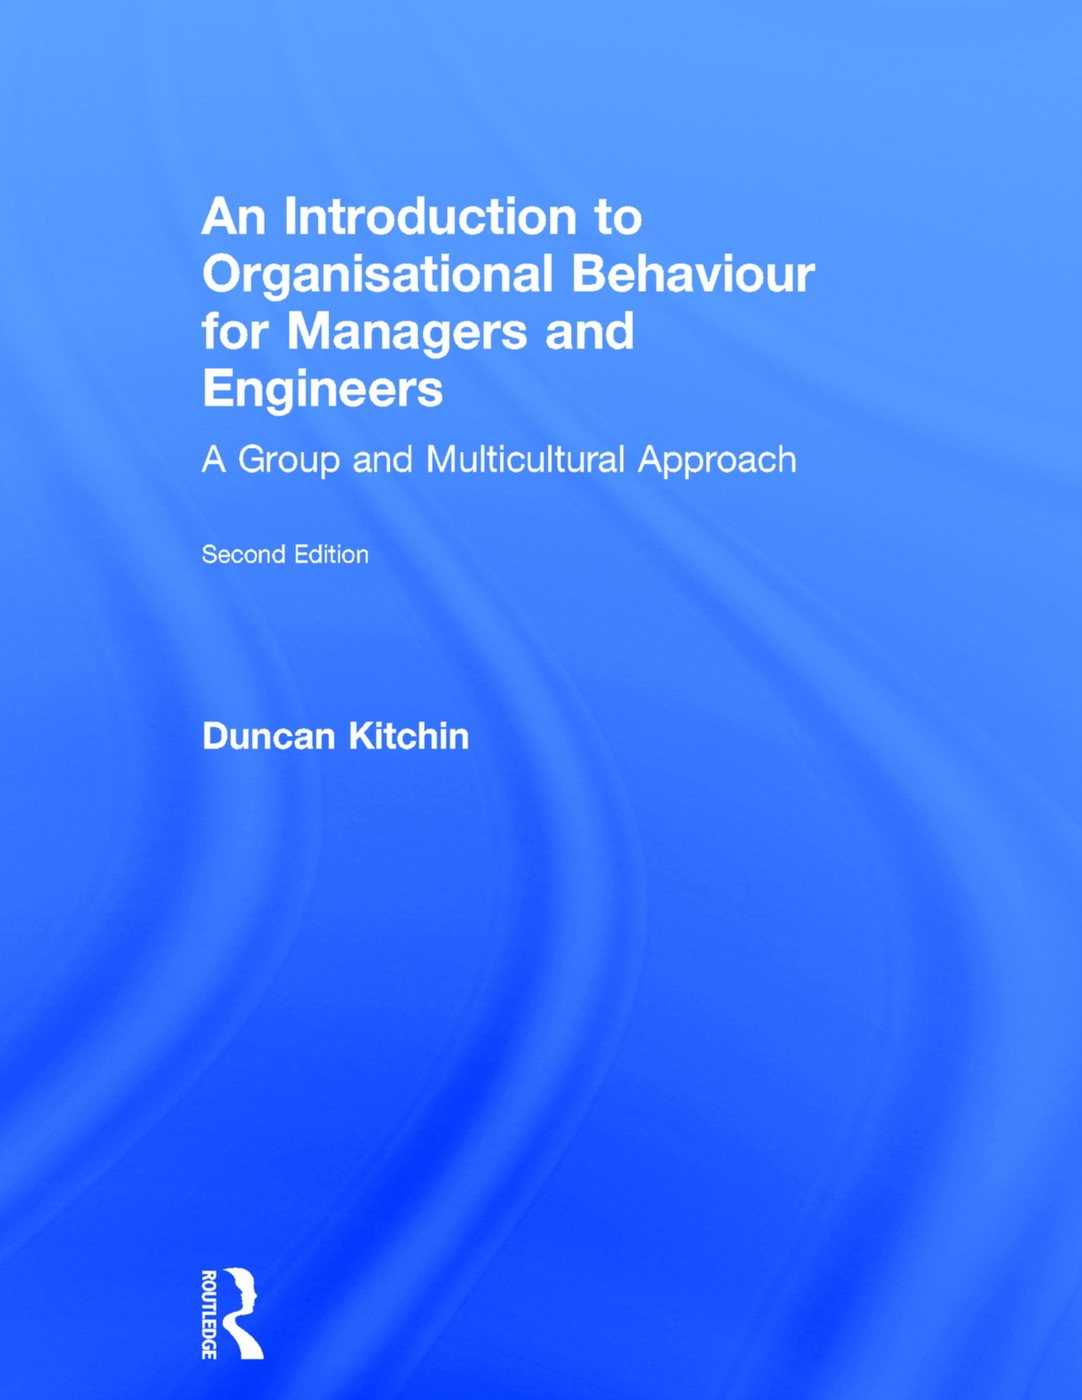 An Introduction to Organisational Behaviour for Managers and Engineers: A Group and Multicultural Approach